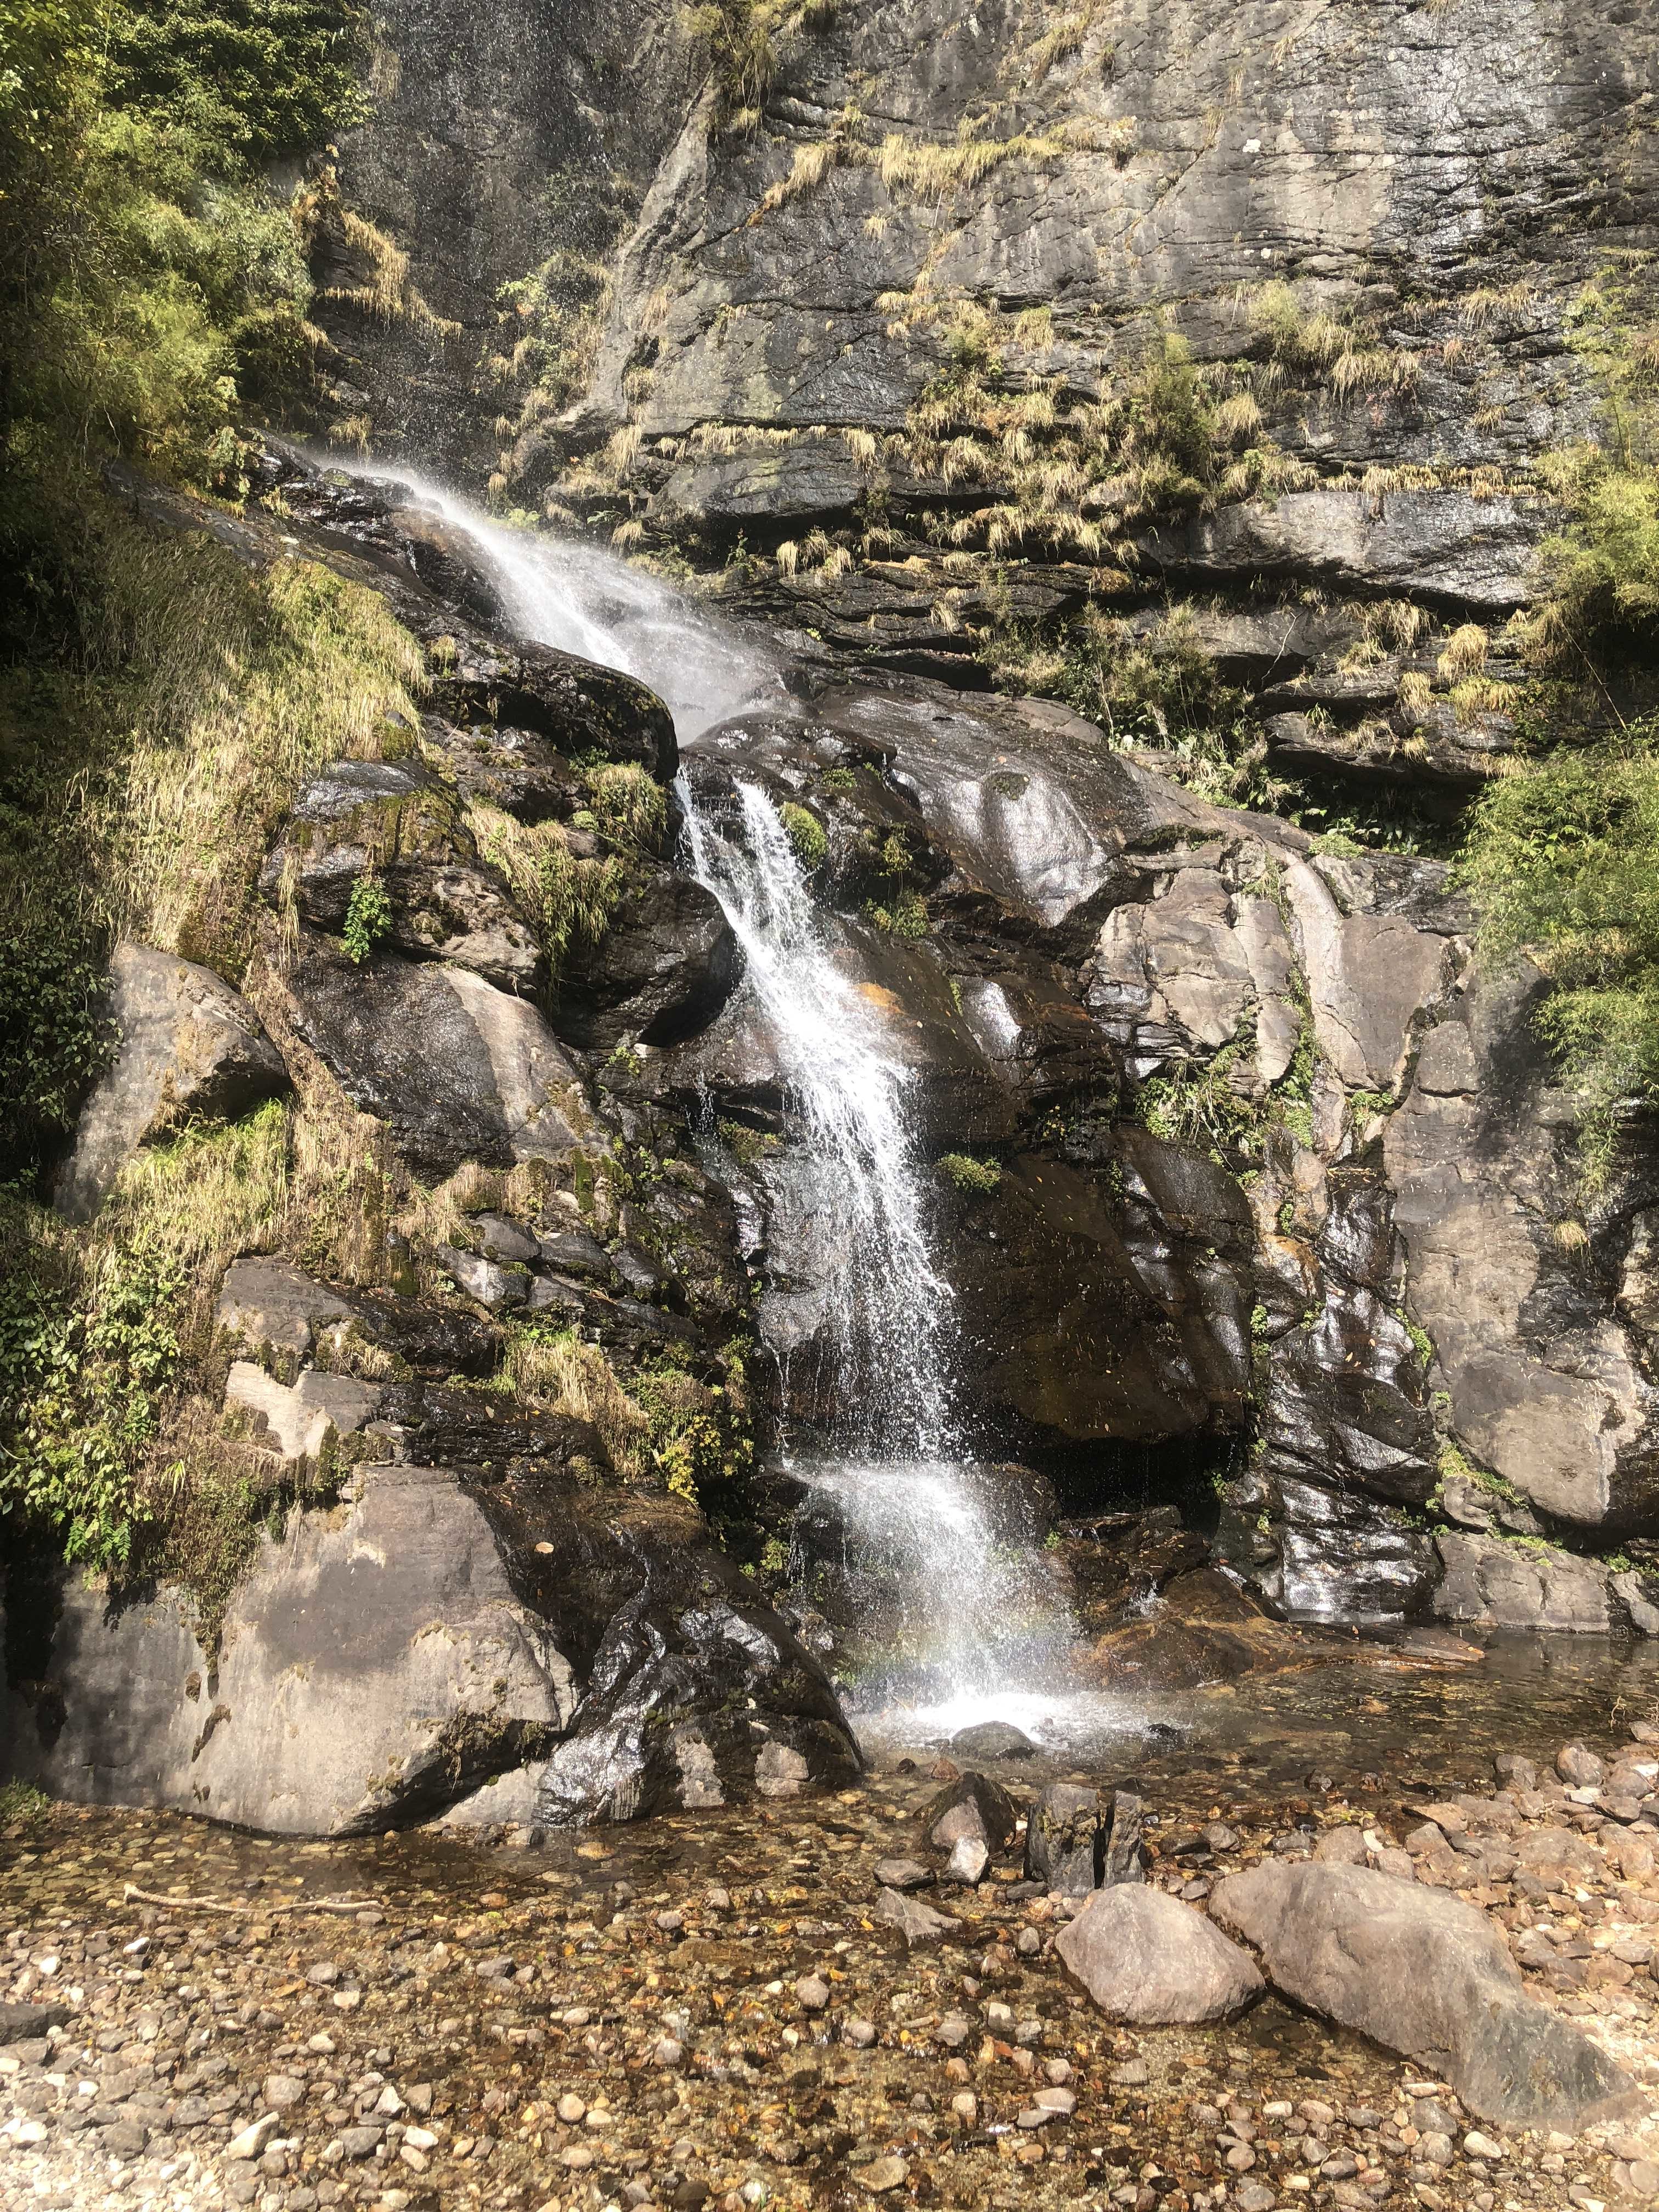 A waterfall along the trek to Everest Base Camp